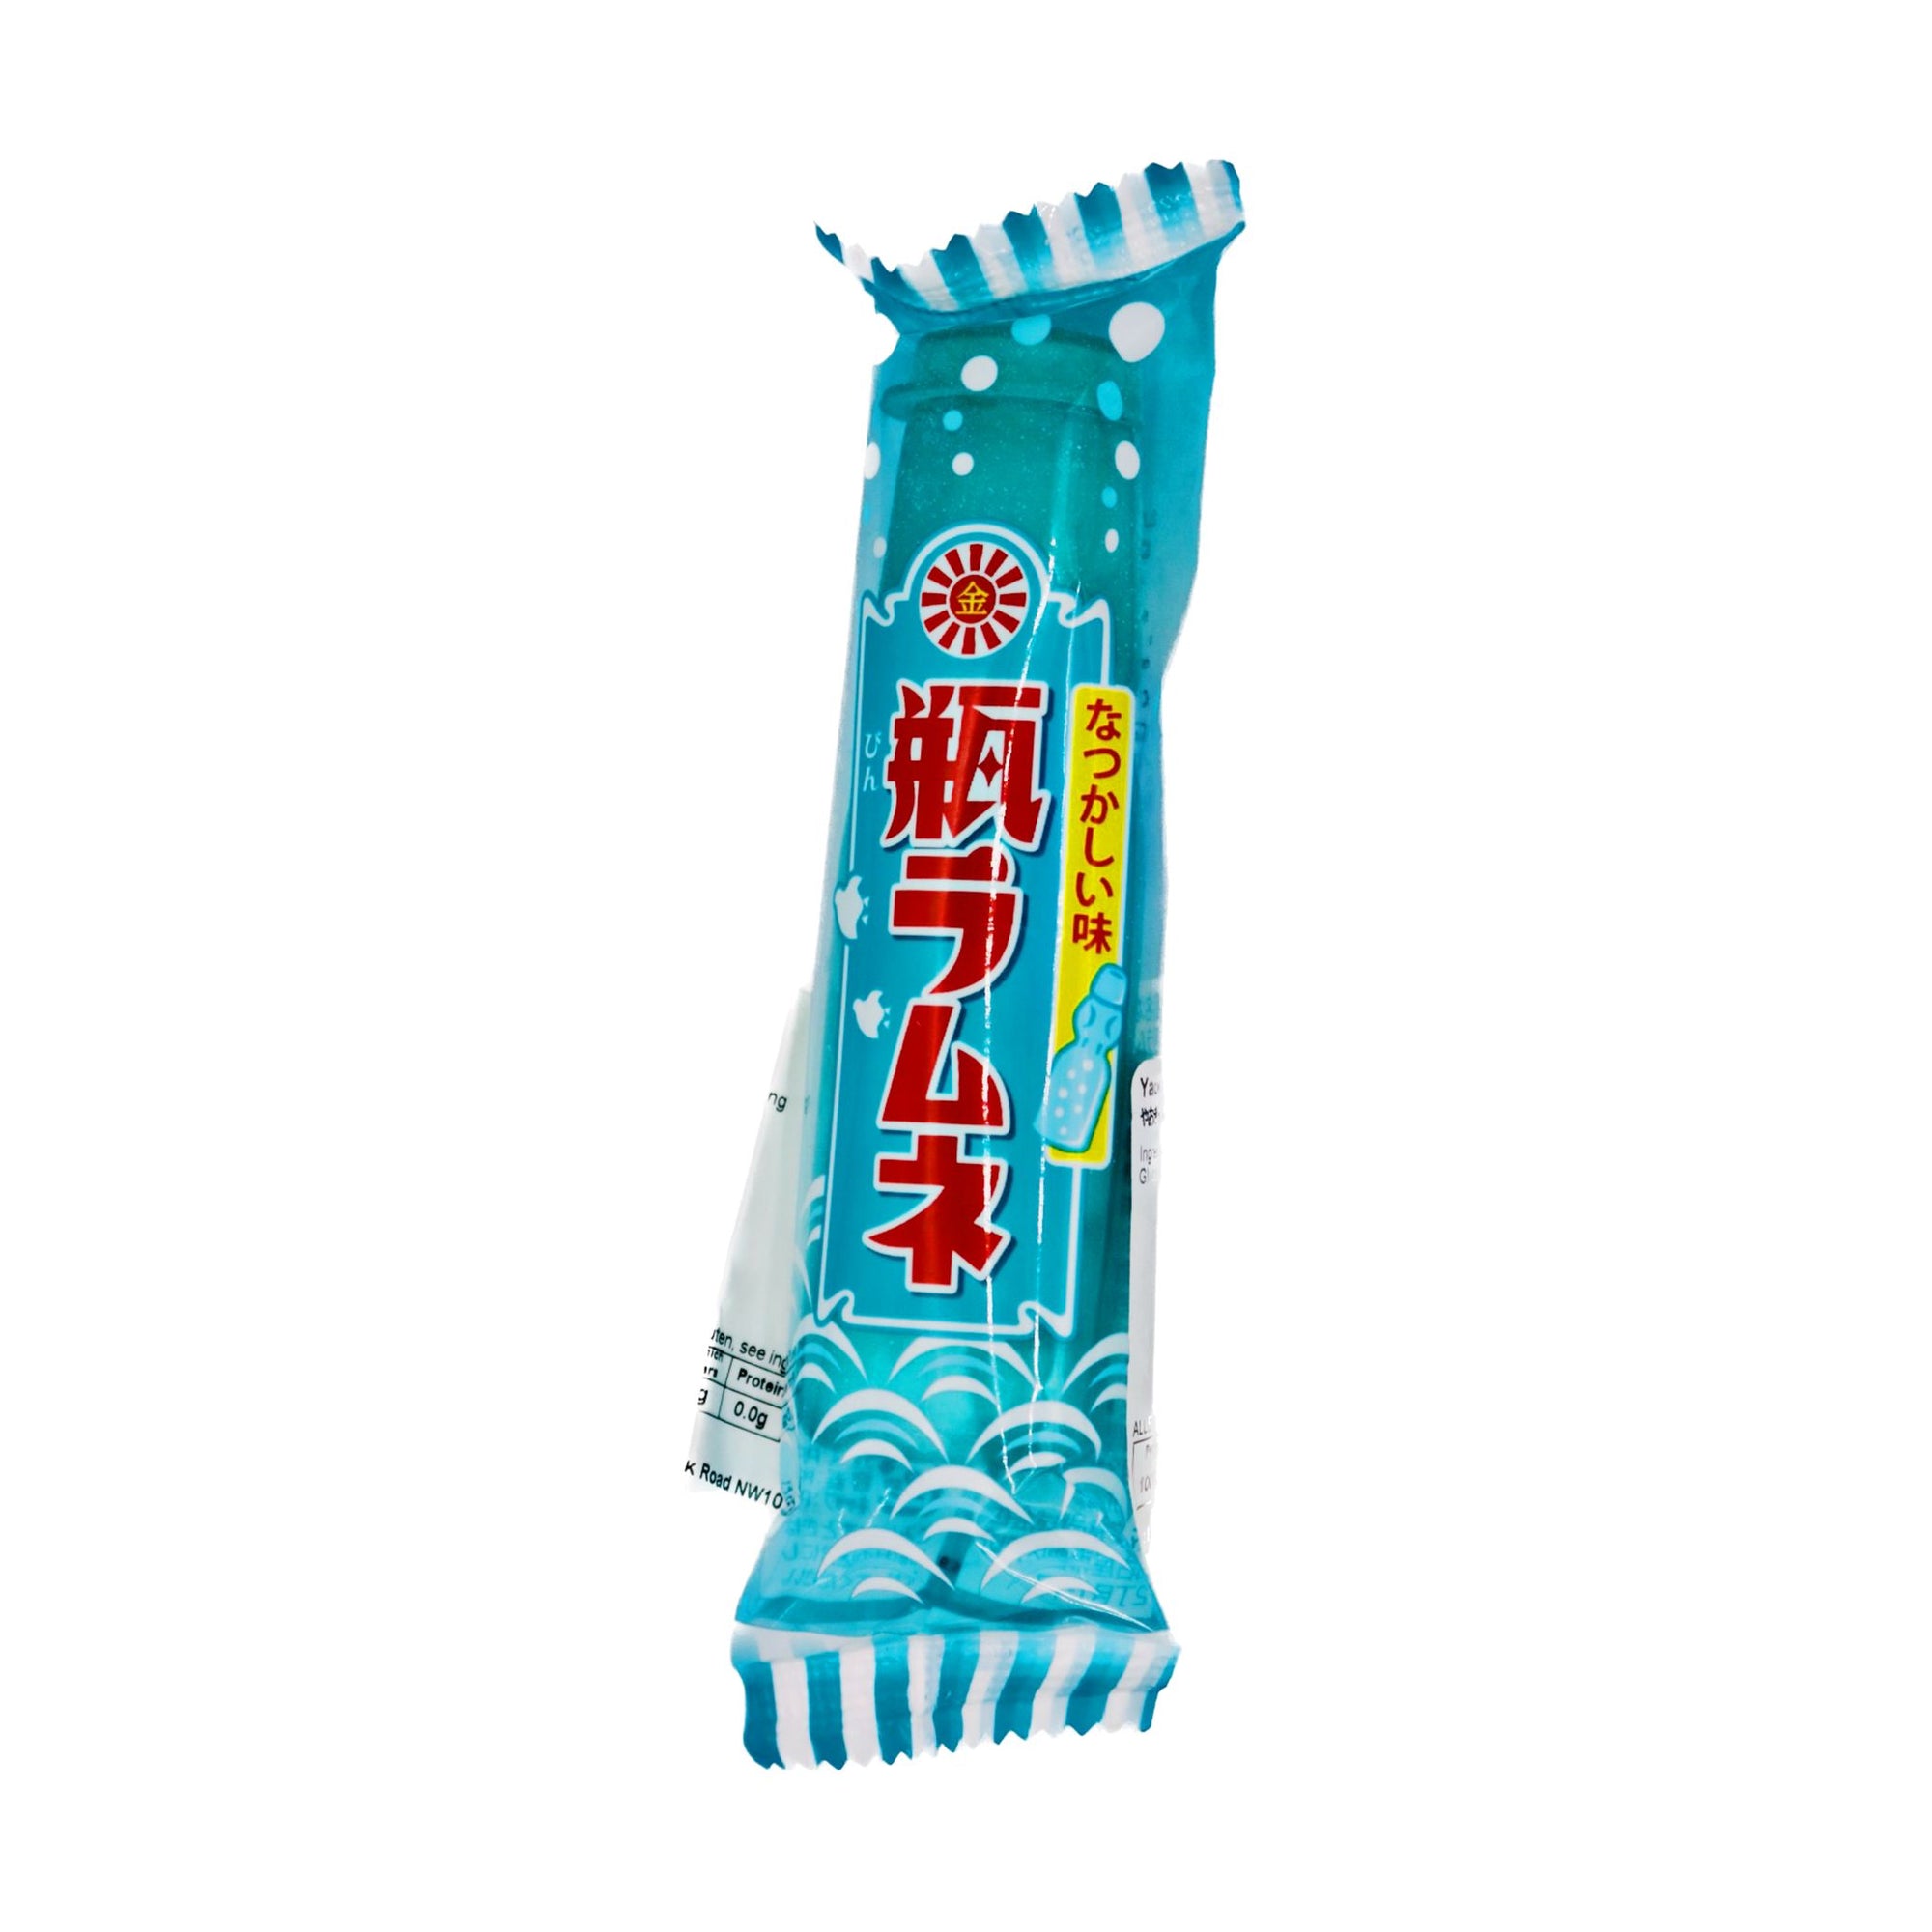 *Yaokin Ramune Tablet Candy 12g